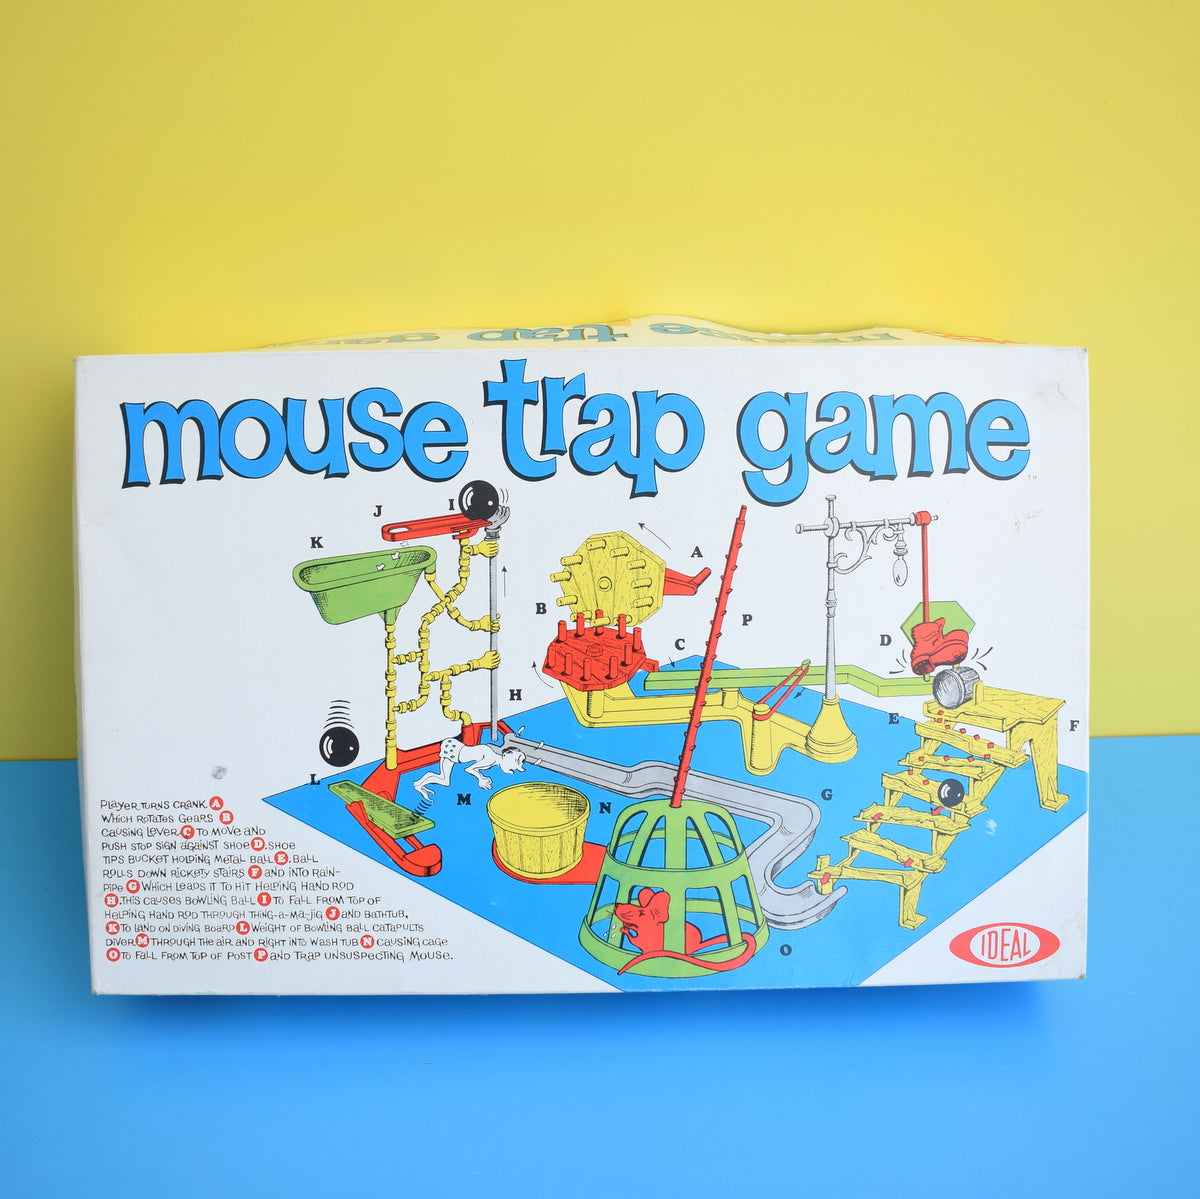 Vintage 1970s Mouse Trap Game - Great Graphics